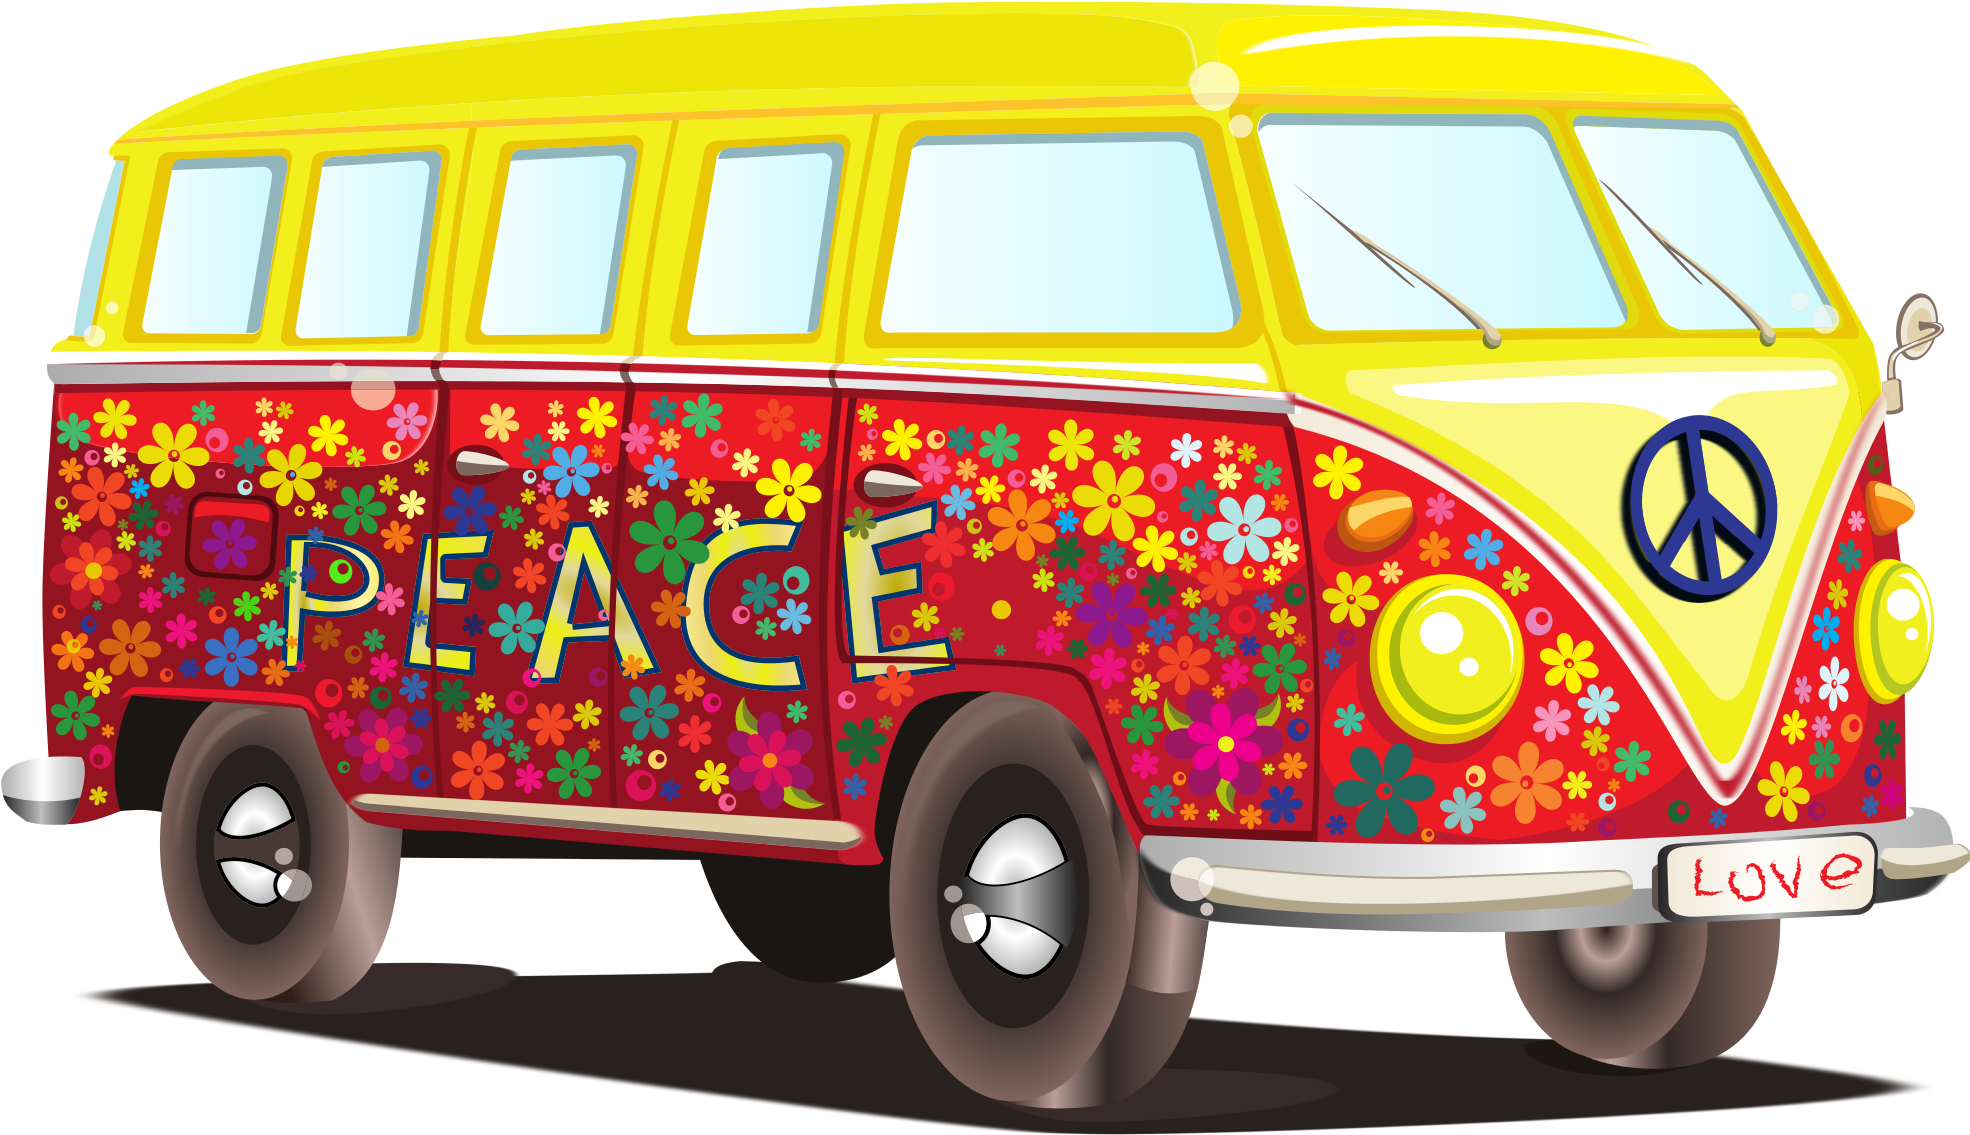 File - Vw Peace And Love - (2000x1250) Png Clipart Download. 